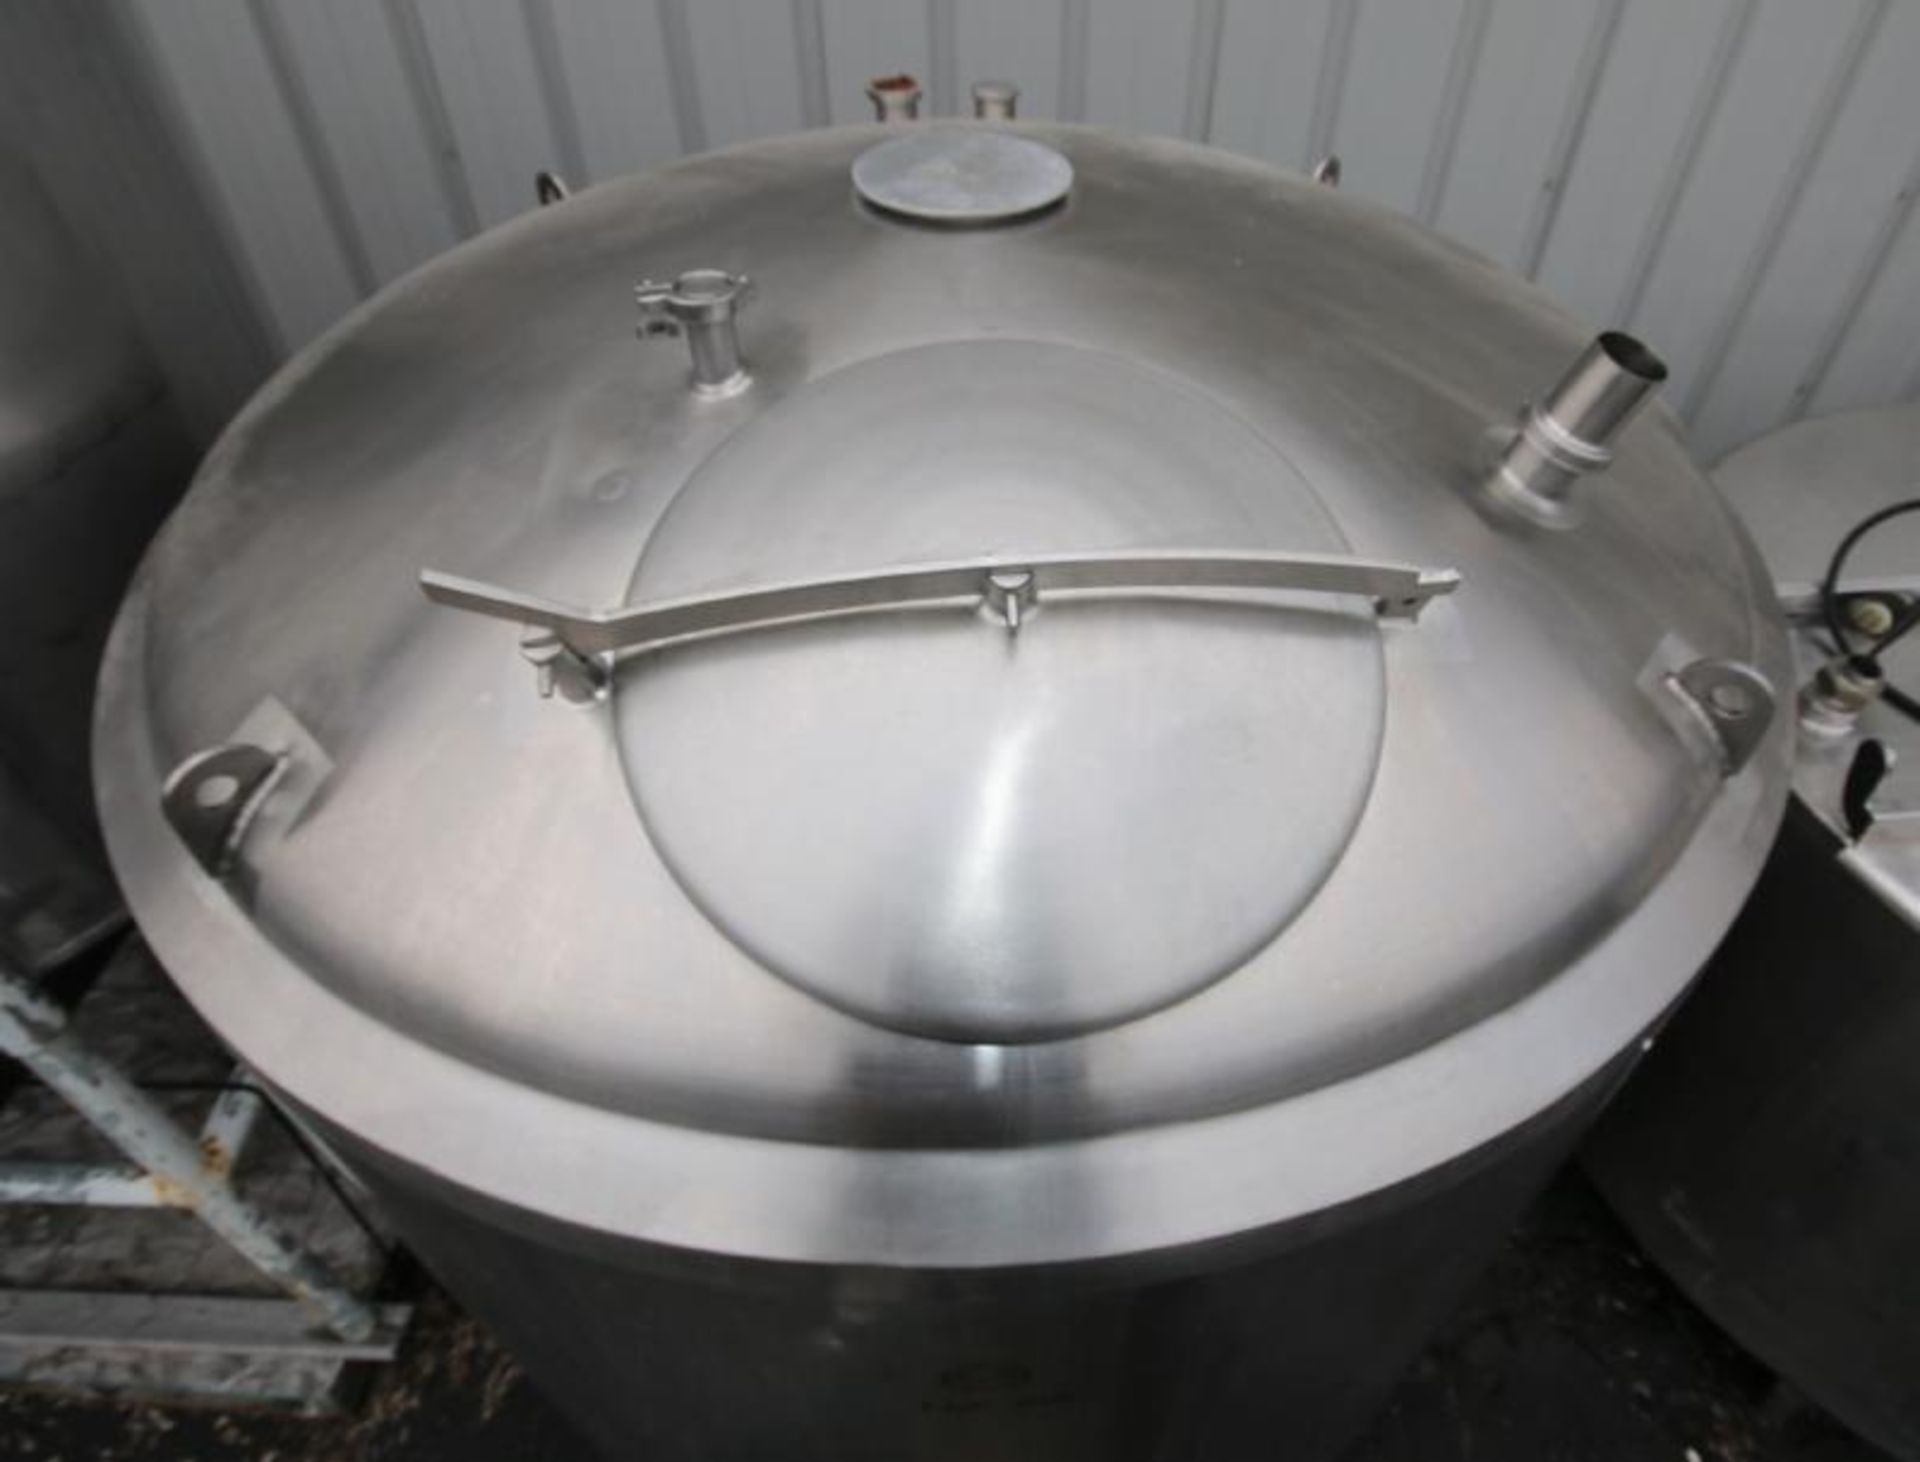 Crepaco Aprox. 500 Gal. Dome Top Cone Bottom Jacketed S/S Tank, SN K-1985, Includes Top Hinged Man - Image 3 of 7